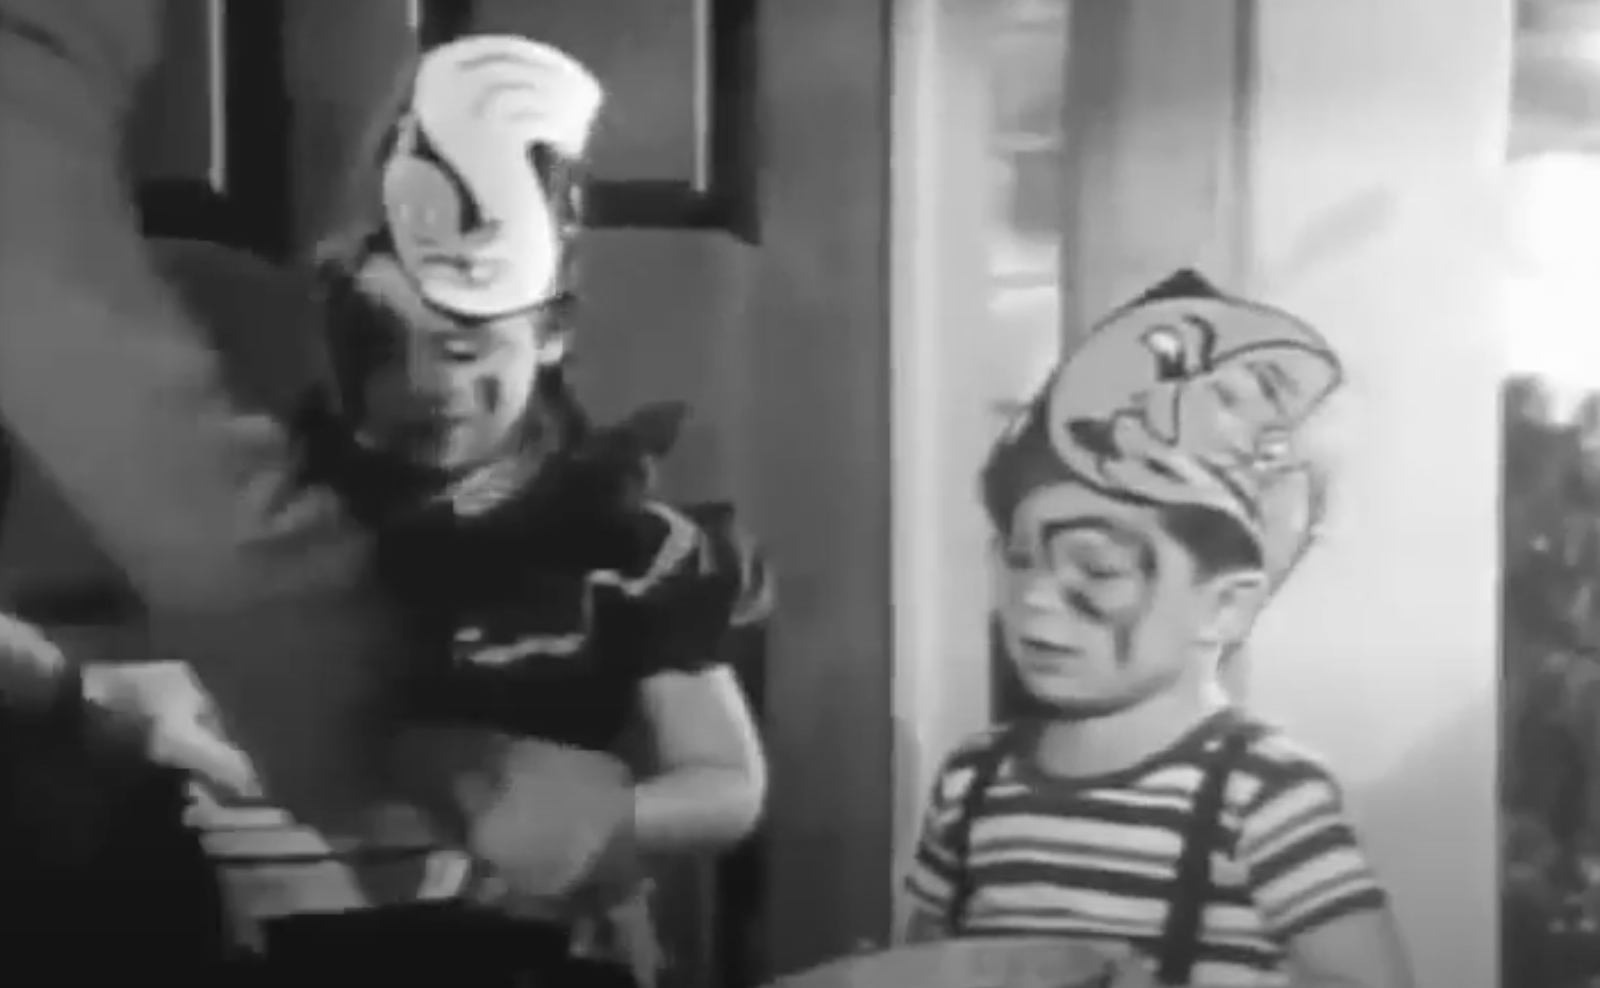 Jerry Mathers Made His TV Debut In An Early '50s Halloween Episode Before He Was 'The Beaver'